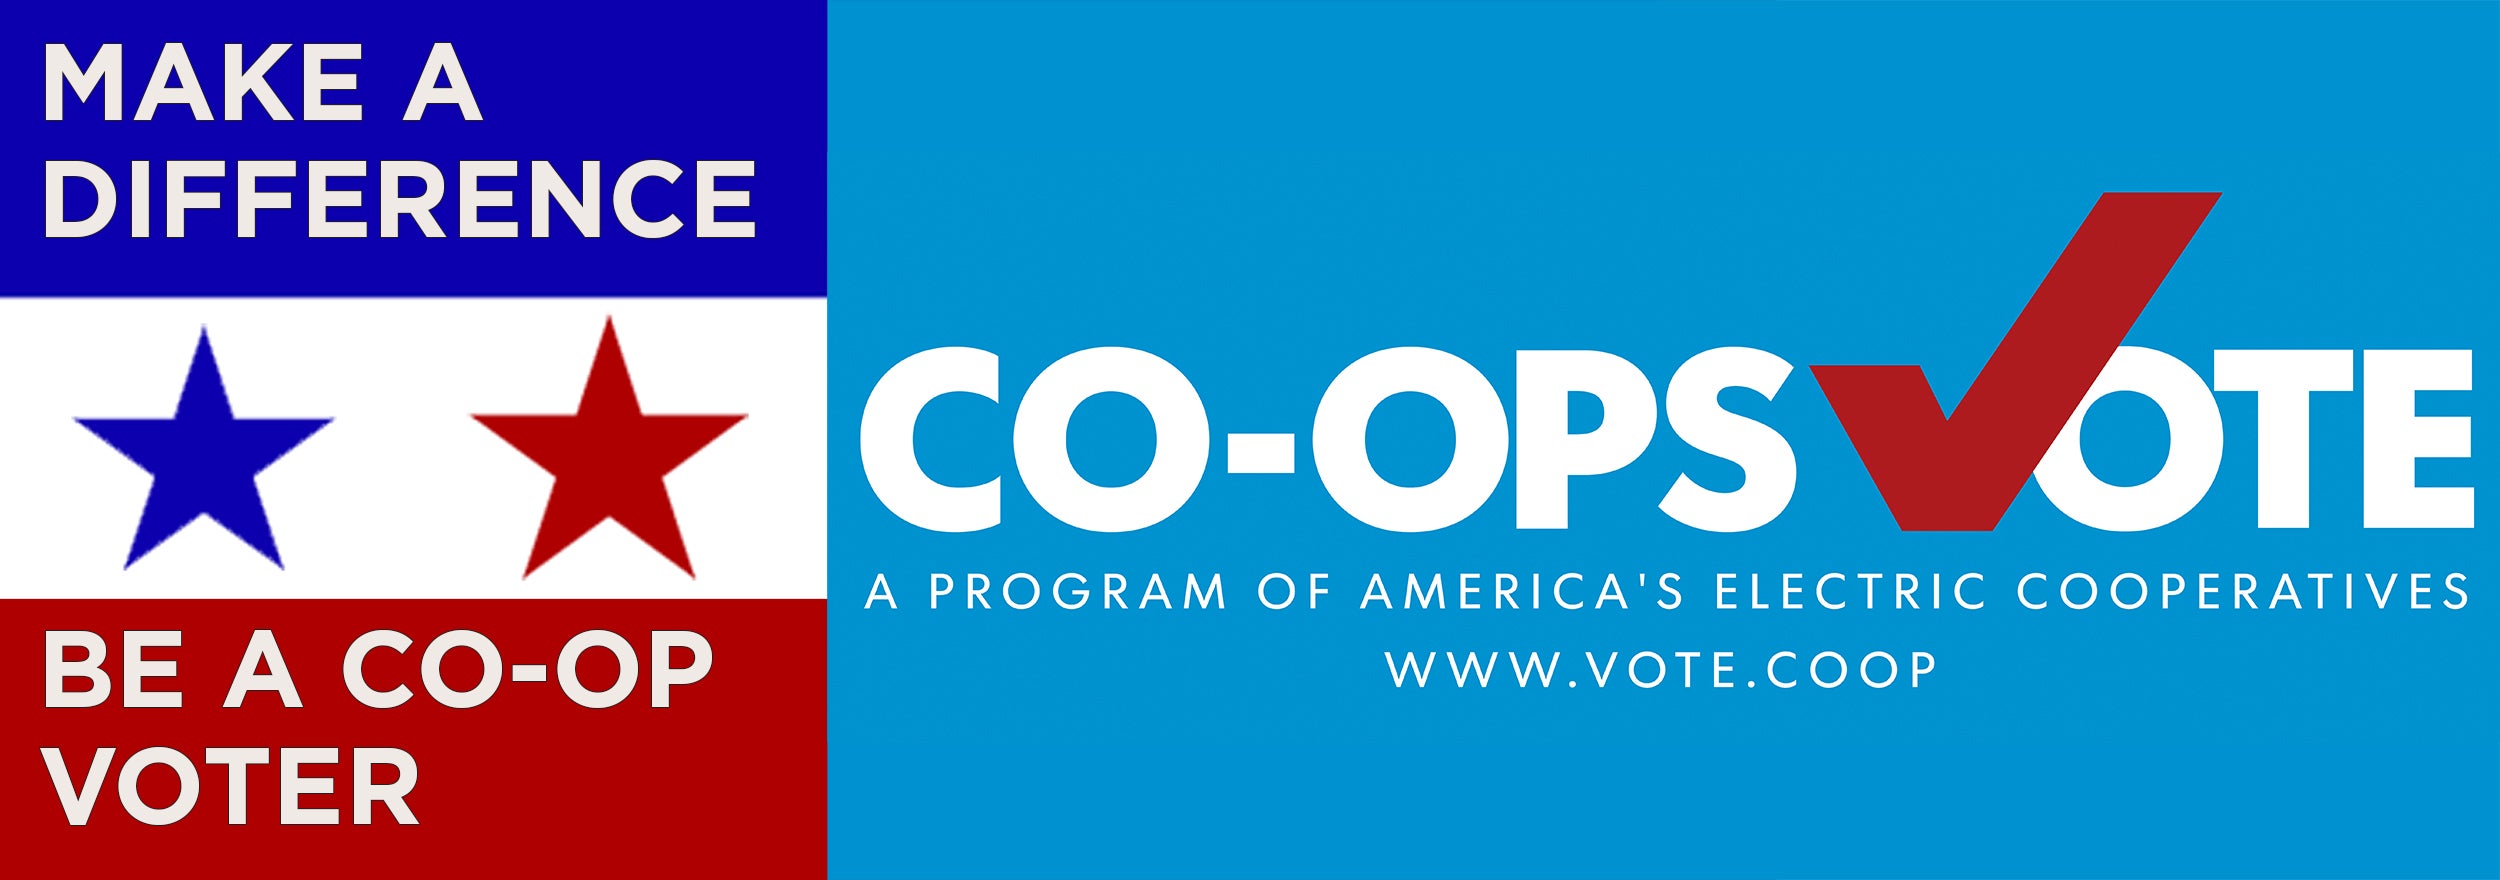 Co-ops vote